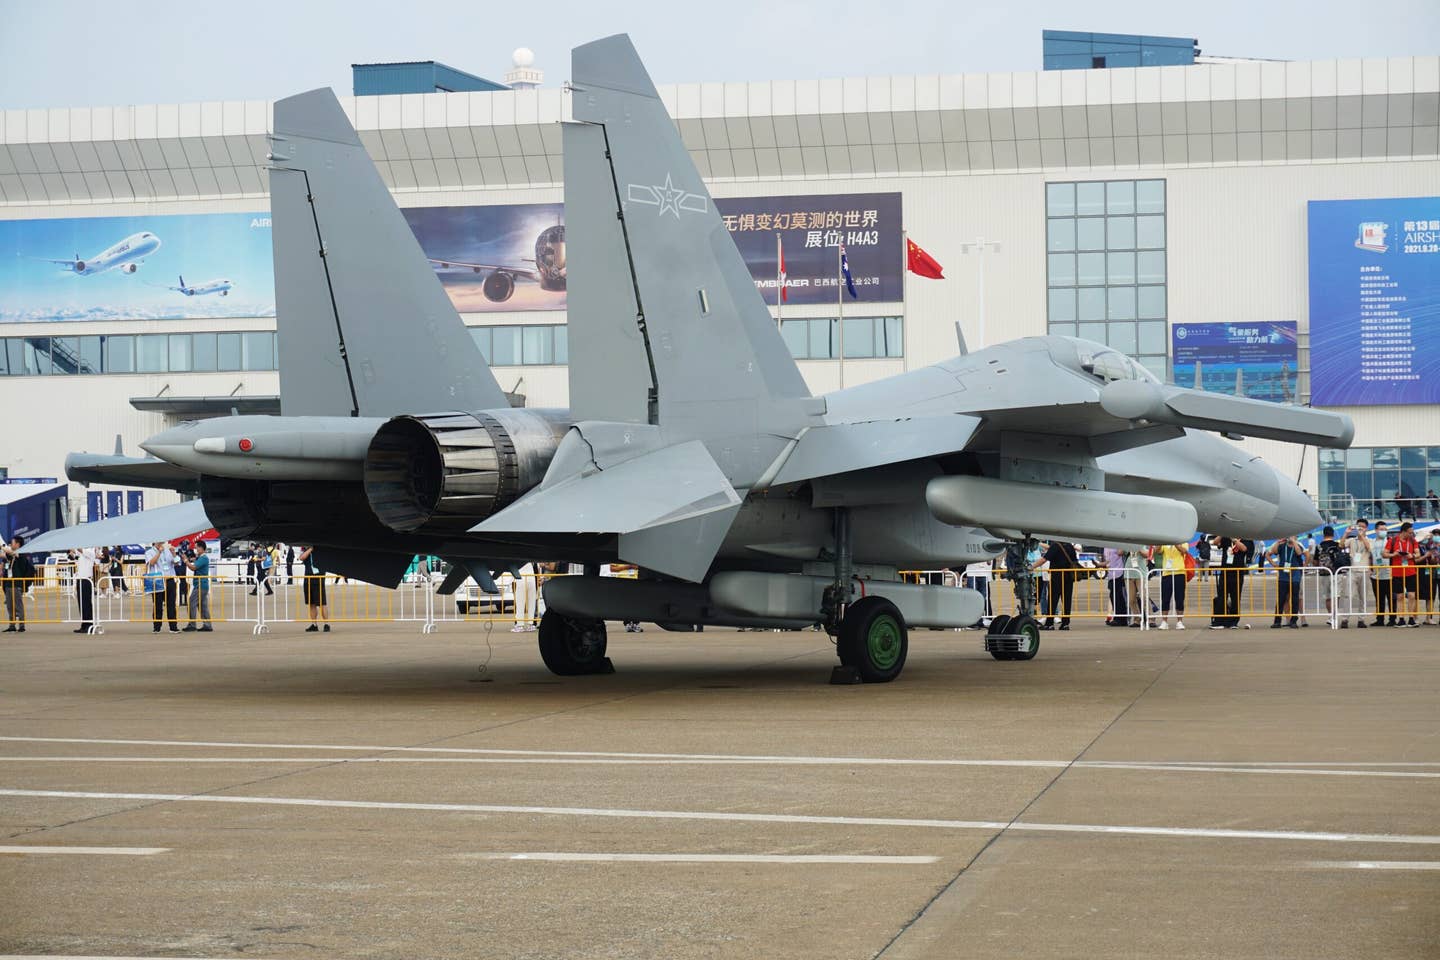 A J-16D electronic warfare aircraft is on display during Airshow China on September 29, 2021, in Zhuhai, Guangdong province. <em>Photo by Long Wei/VCG via Getty Images</em>